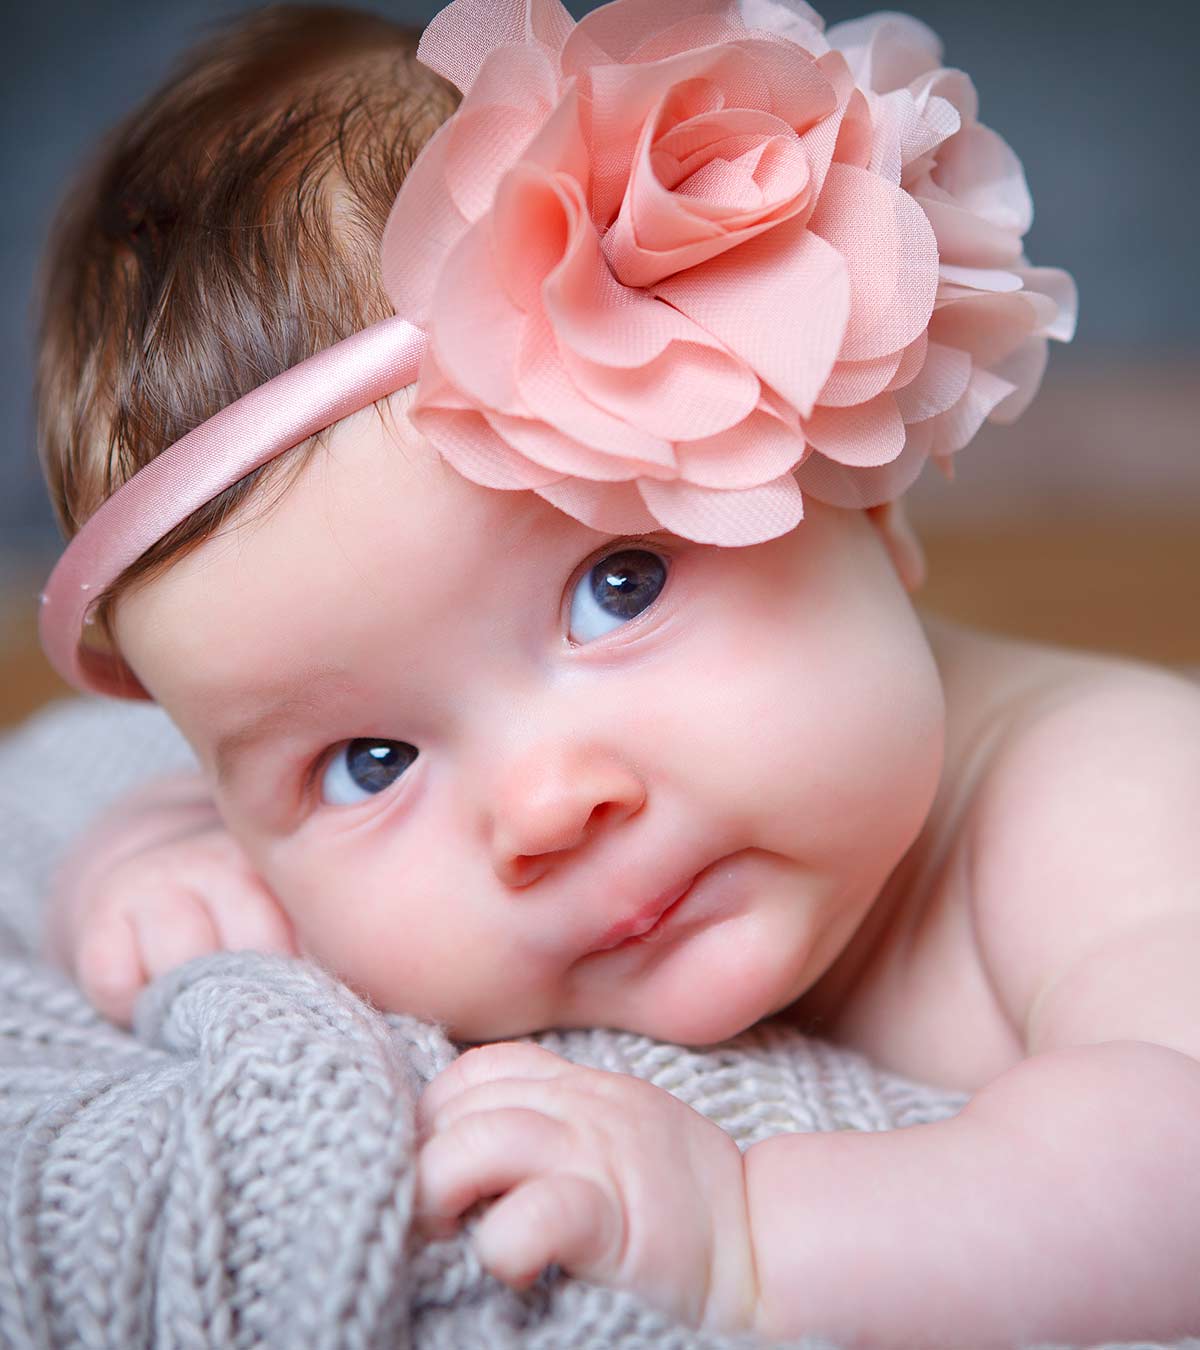 200 Elegant Baby Names With Meanings That Are Posh And Refined